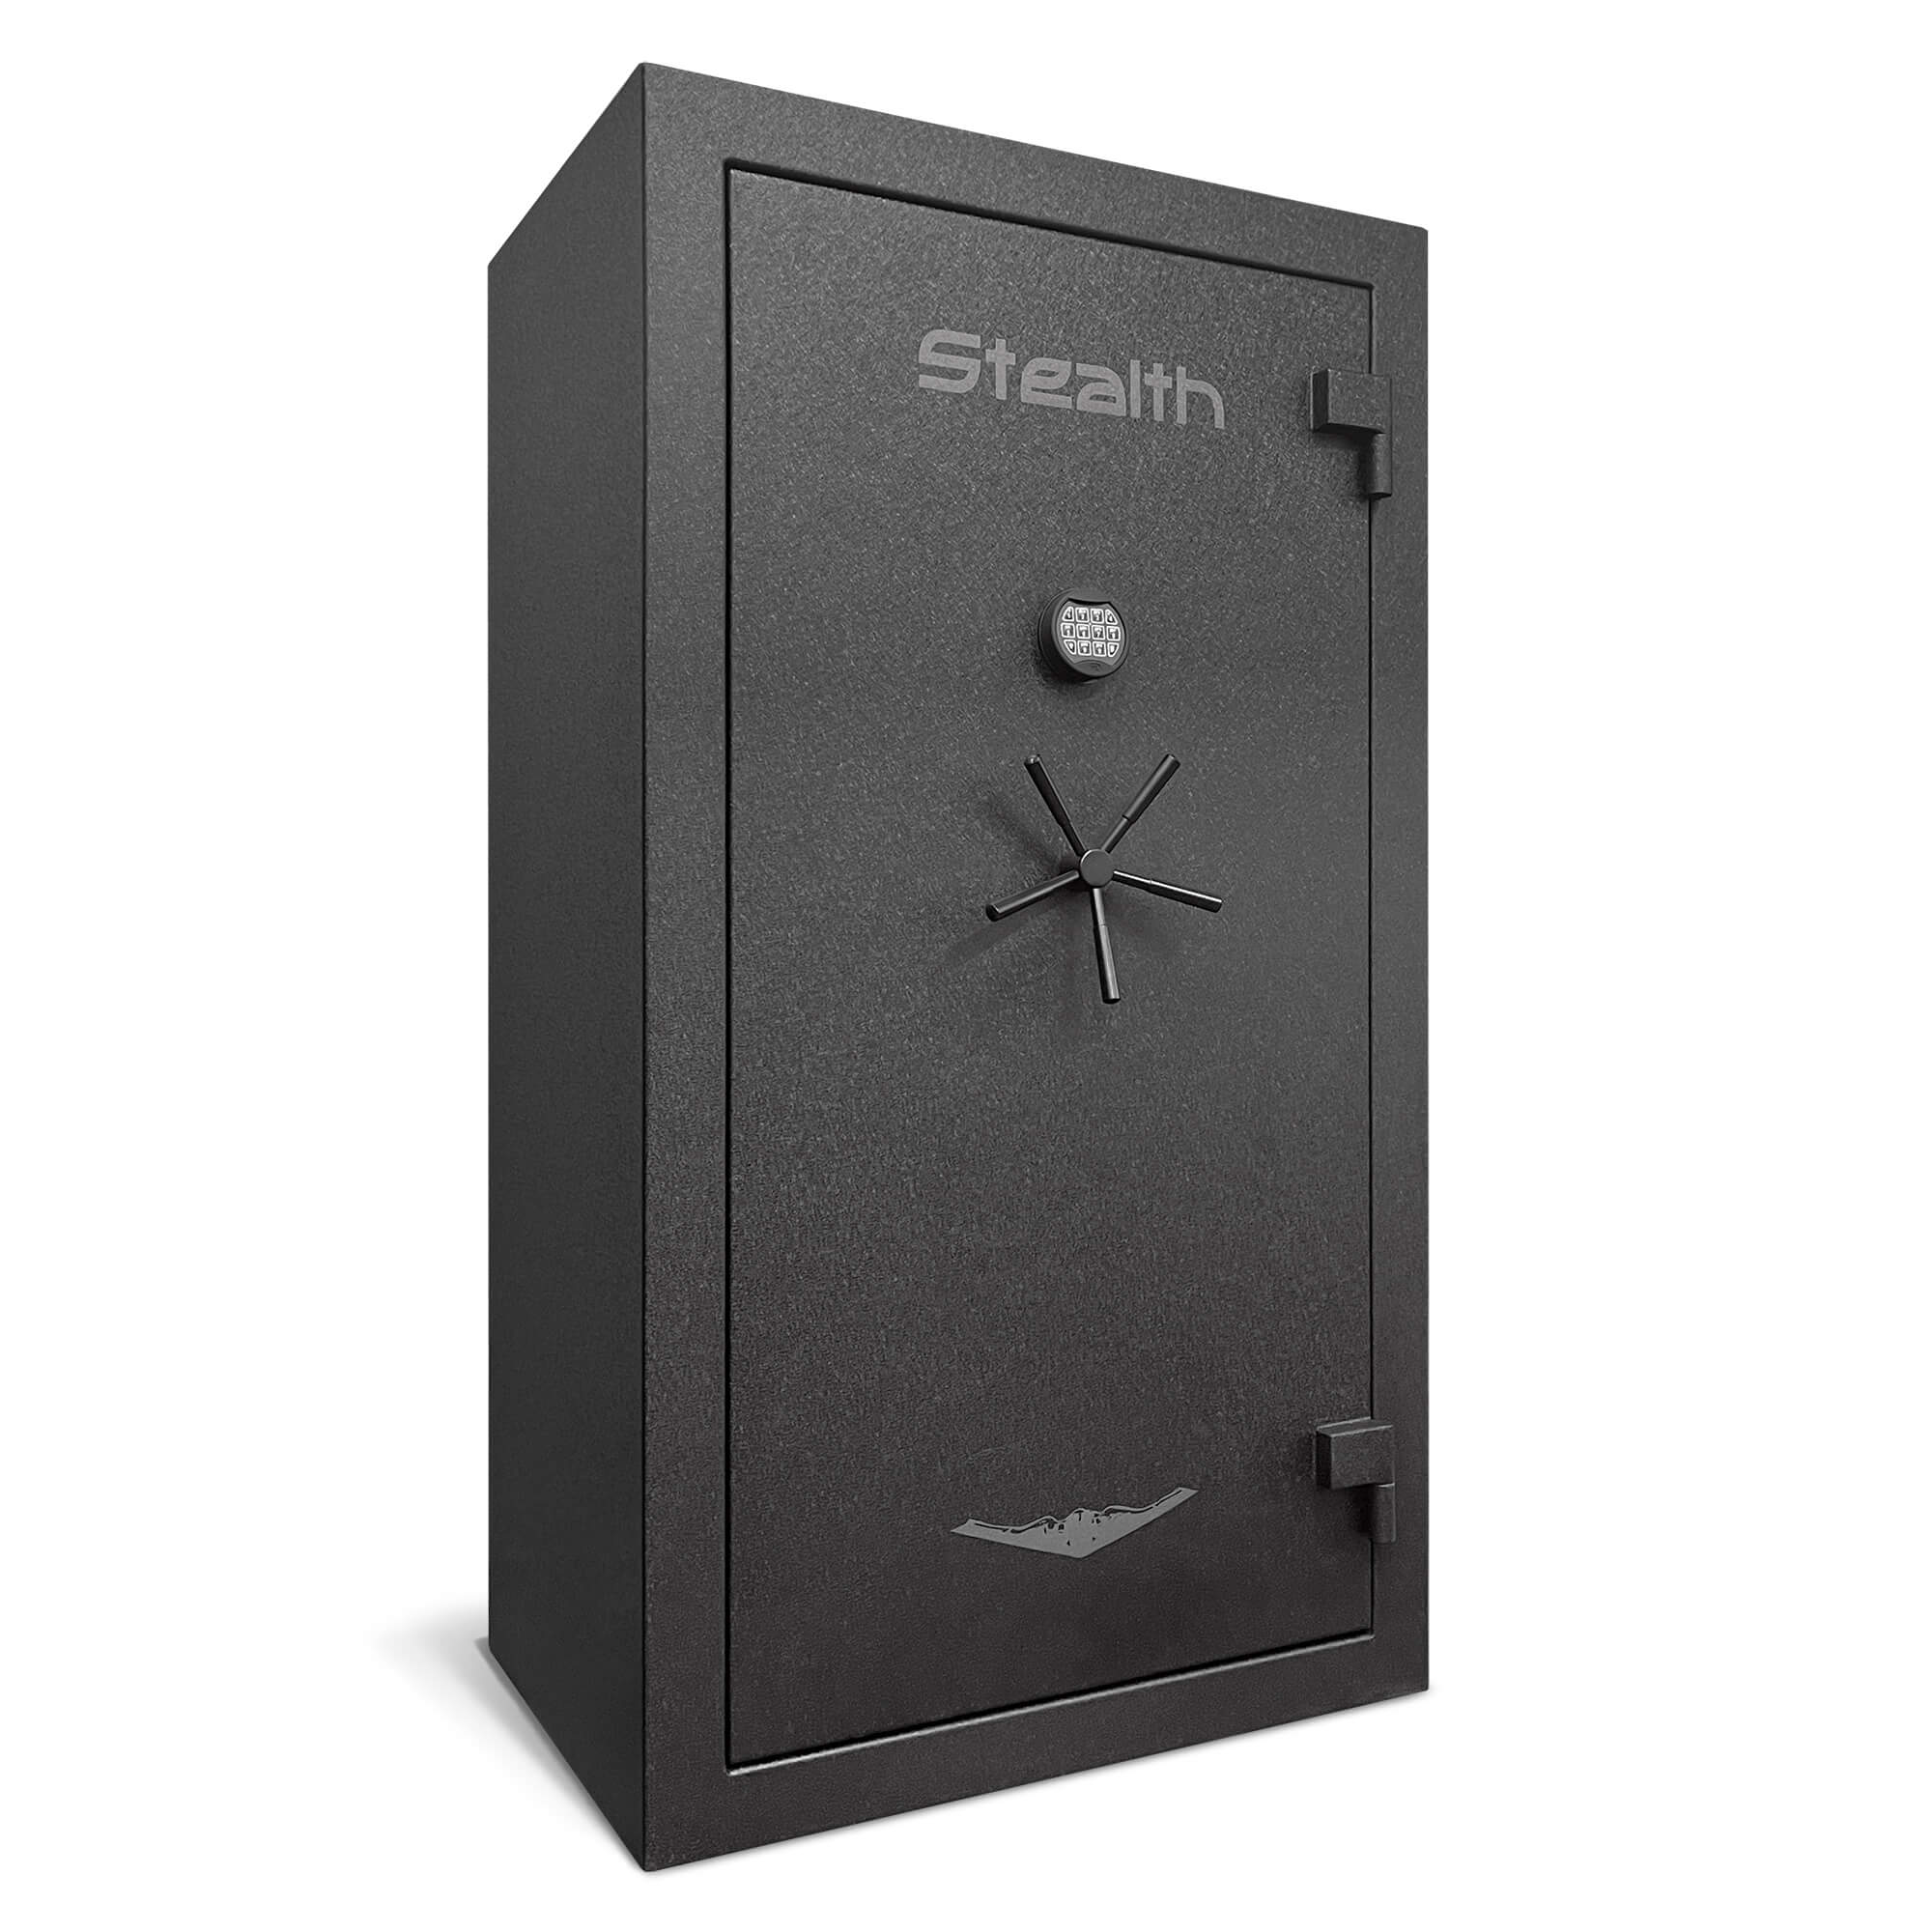 Stealth UL 36 | 1 hour Fire Protection | 66" x 36" x 29" | Liberty Safe Norcal.